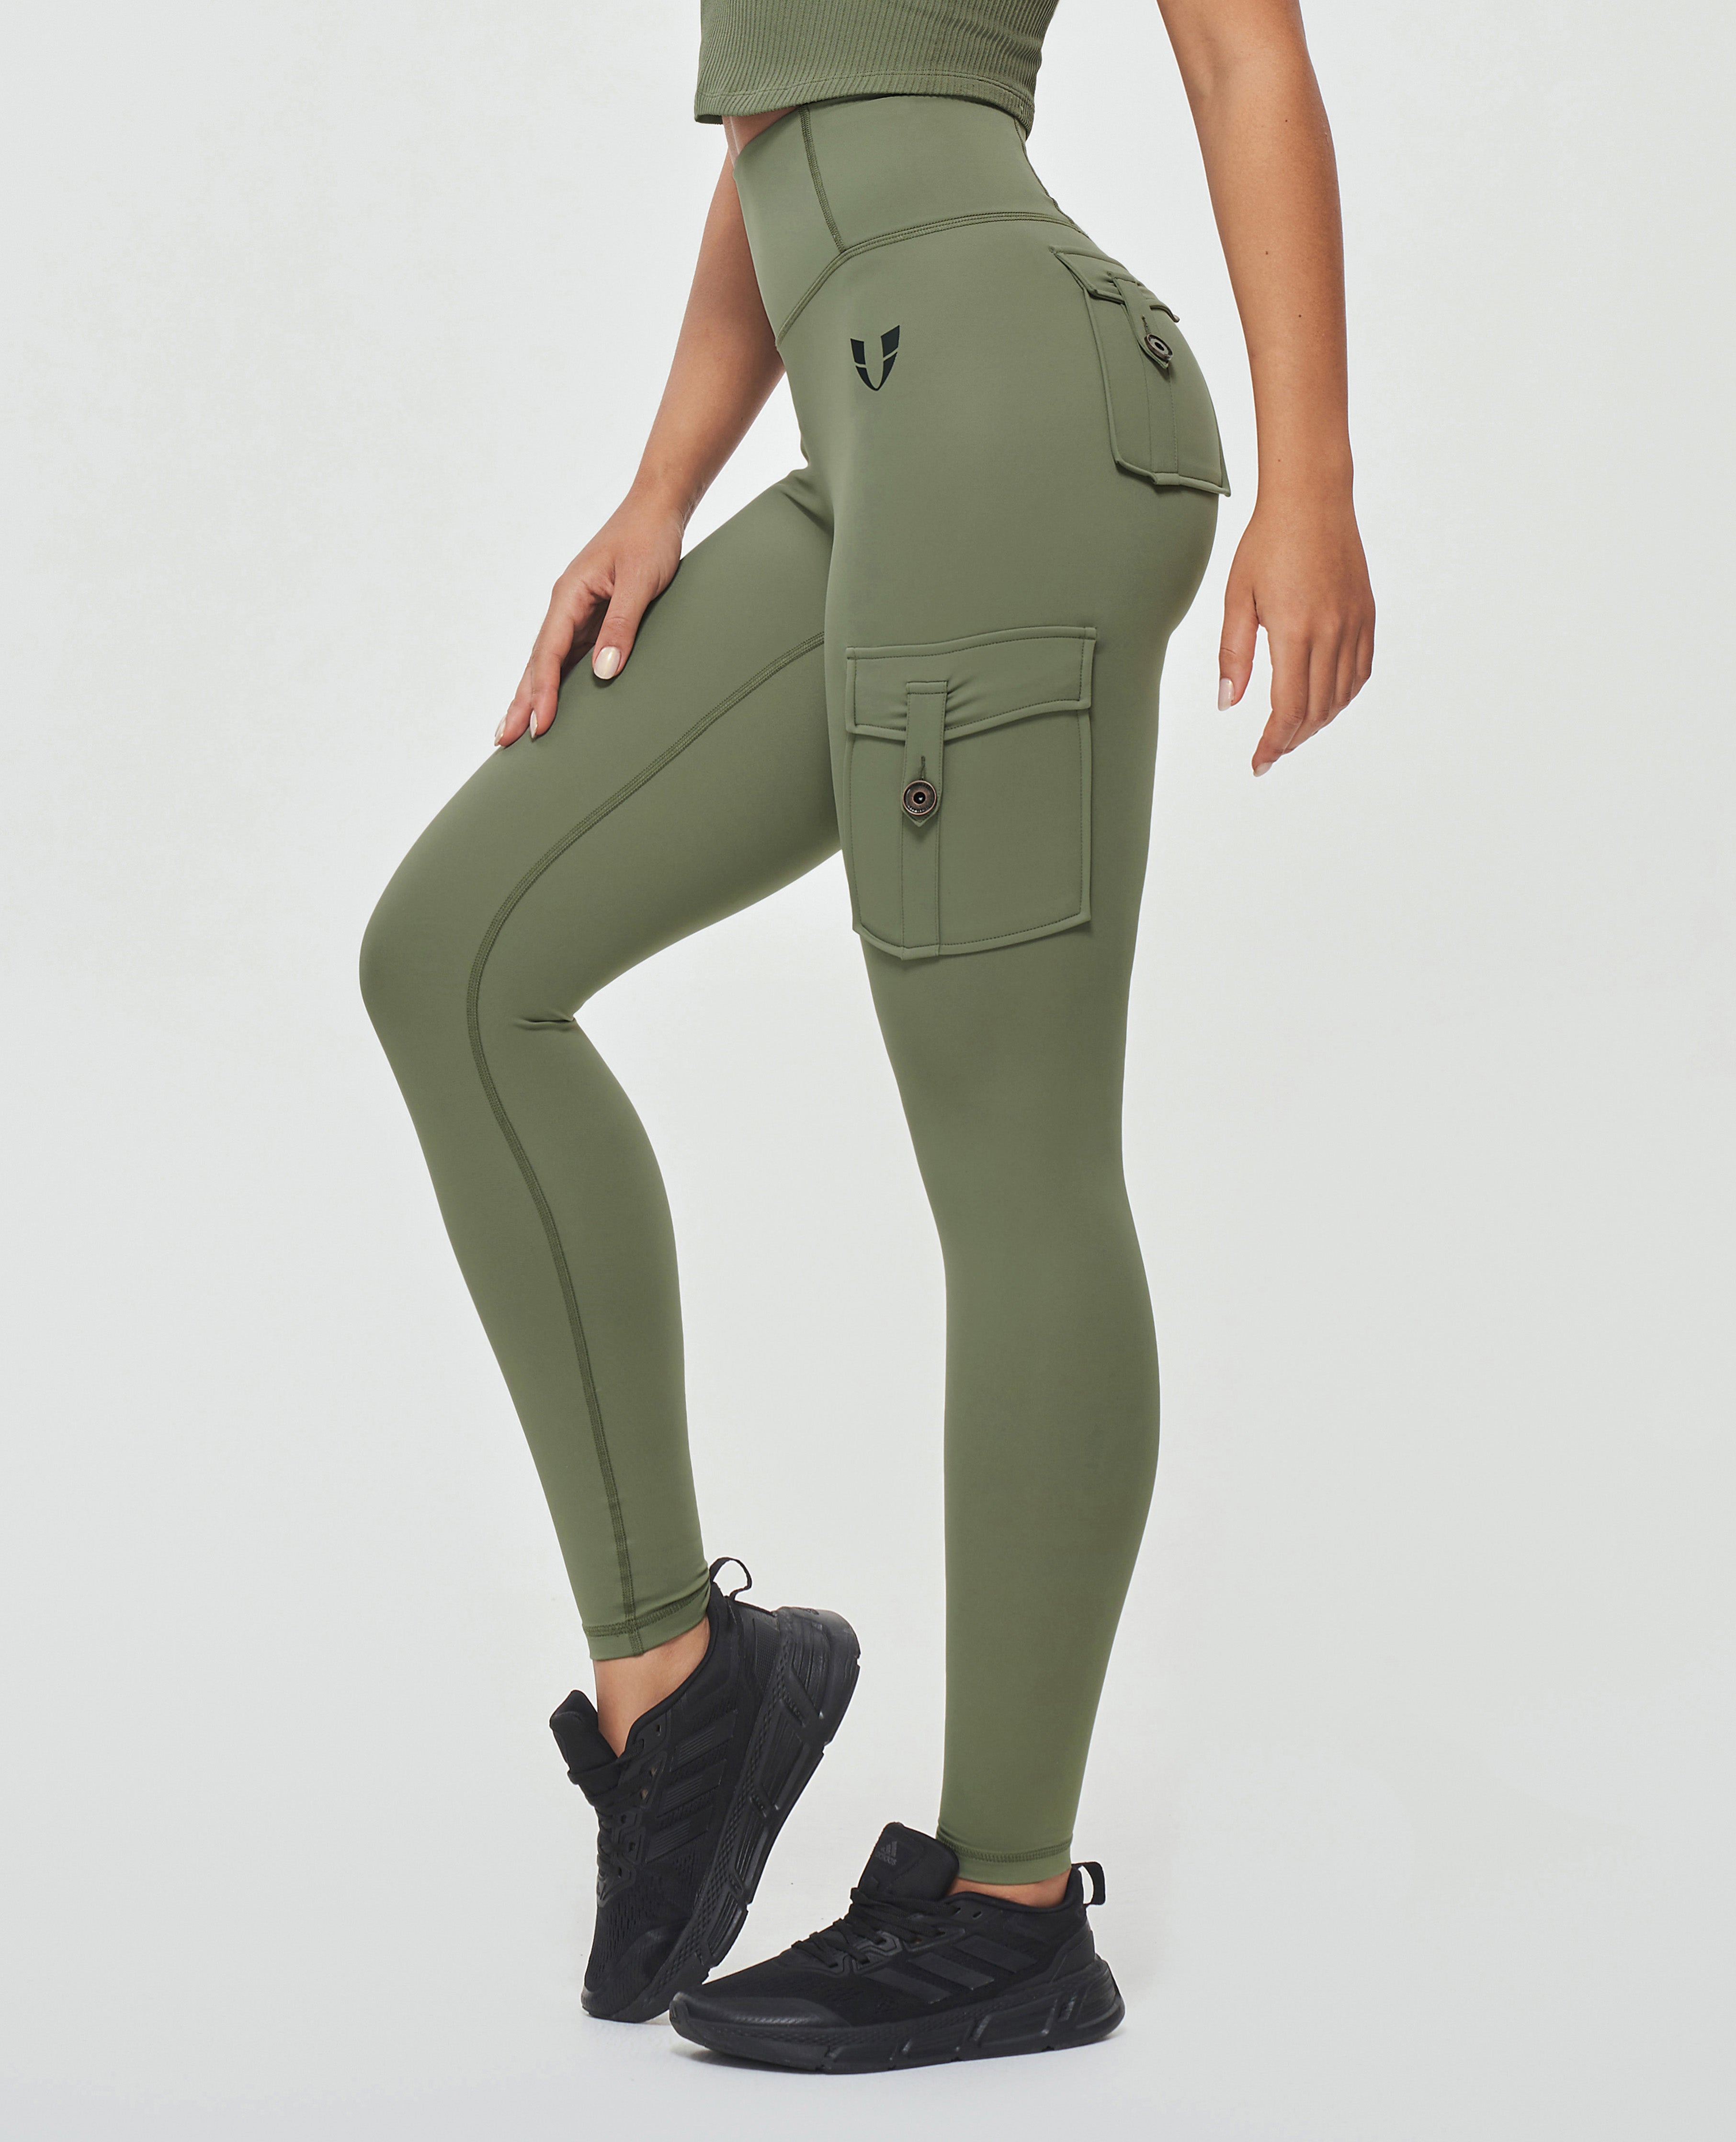 Putting the “Go” in Cargo: A Glimpse Behind the Design of the Versatile  Women's Cargo Leggings from ATG by Wrangler® :: Kontoor Brands, Inc. (KTB)